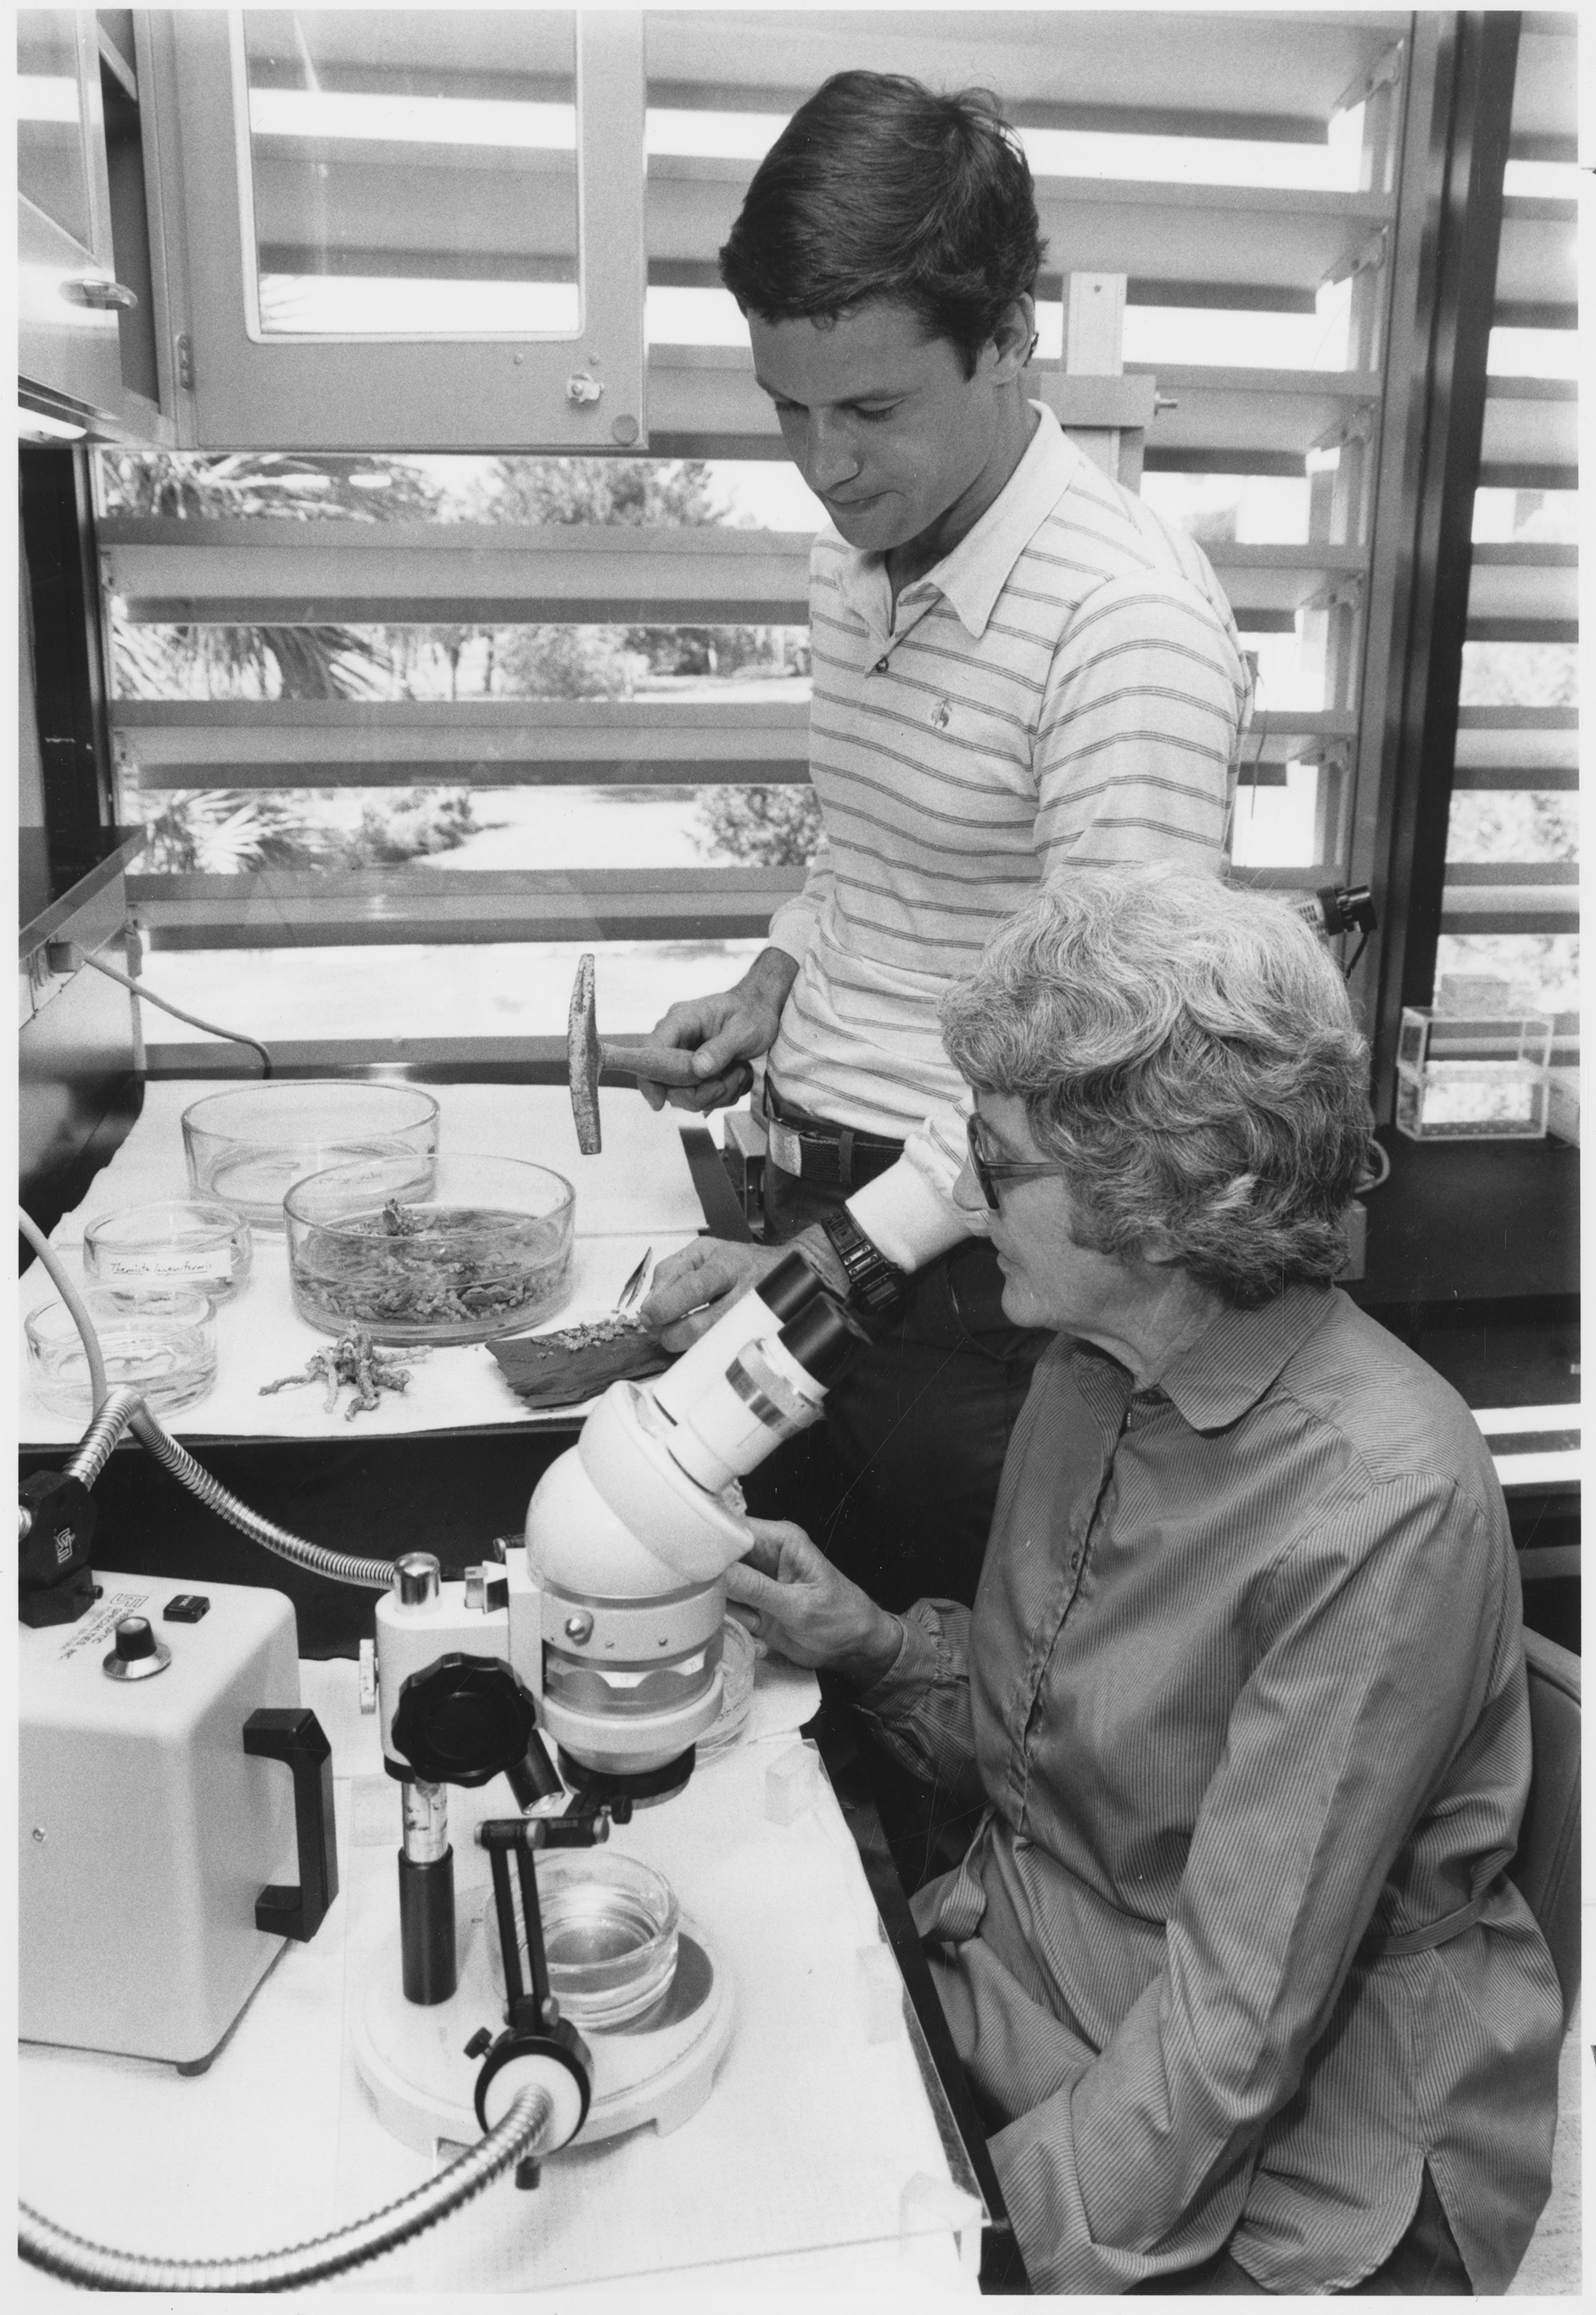 Mary Rice and sits at a desk near a microscope. A man, standing, holds a hammer. A bowl of something